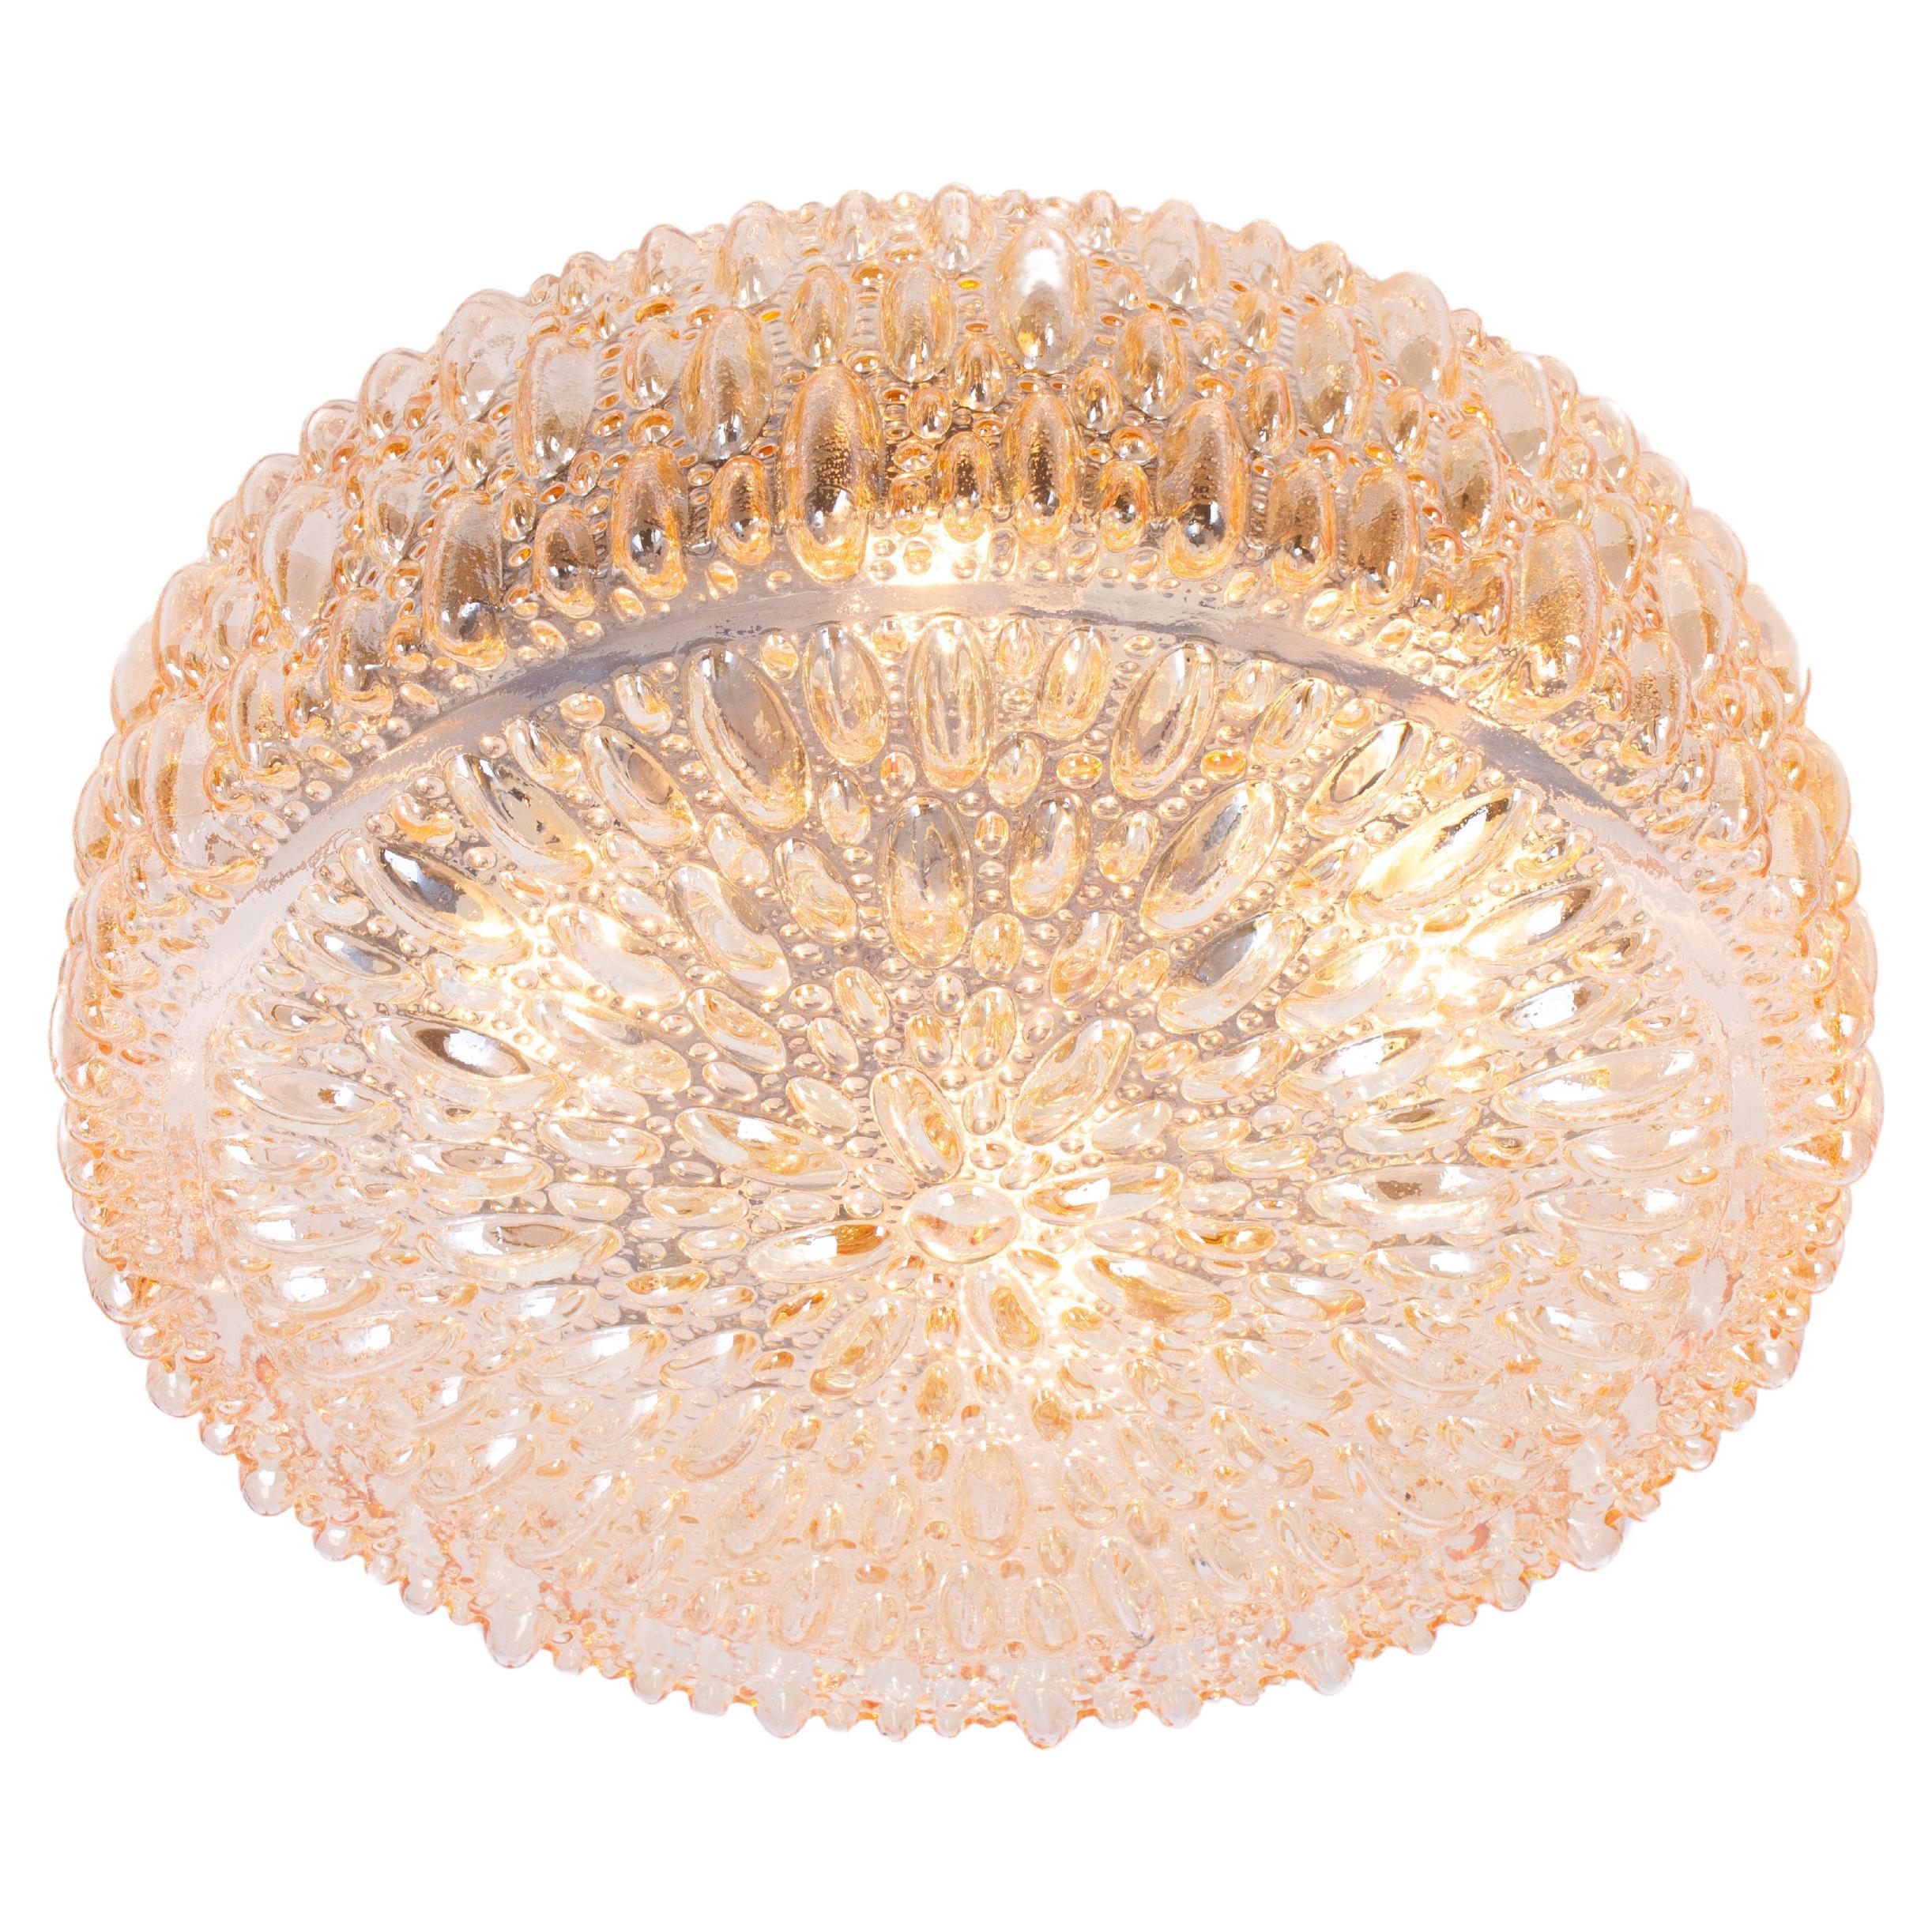 1 of 6 Large Round Textured Glass Flushmount by Limburg, Germany, 1970s